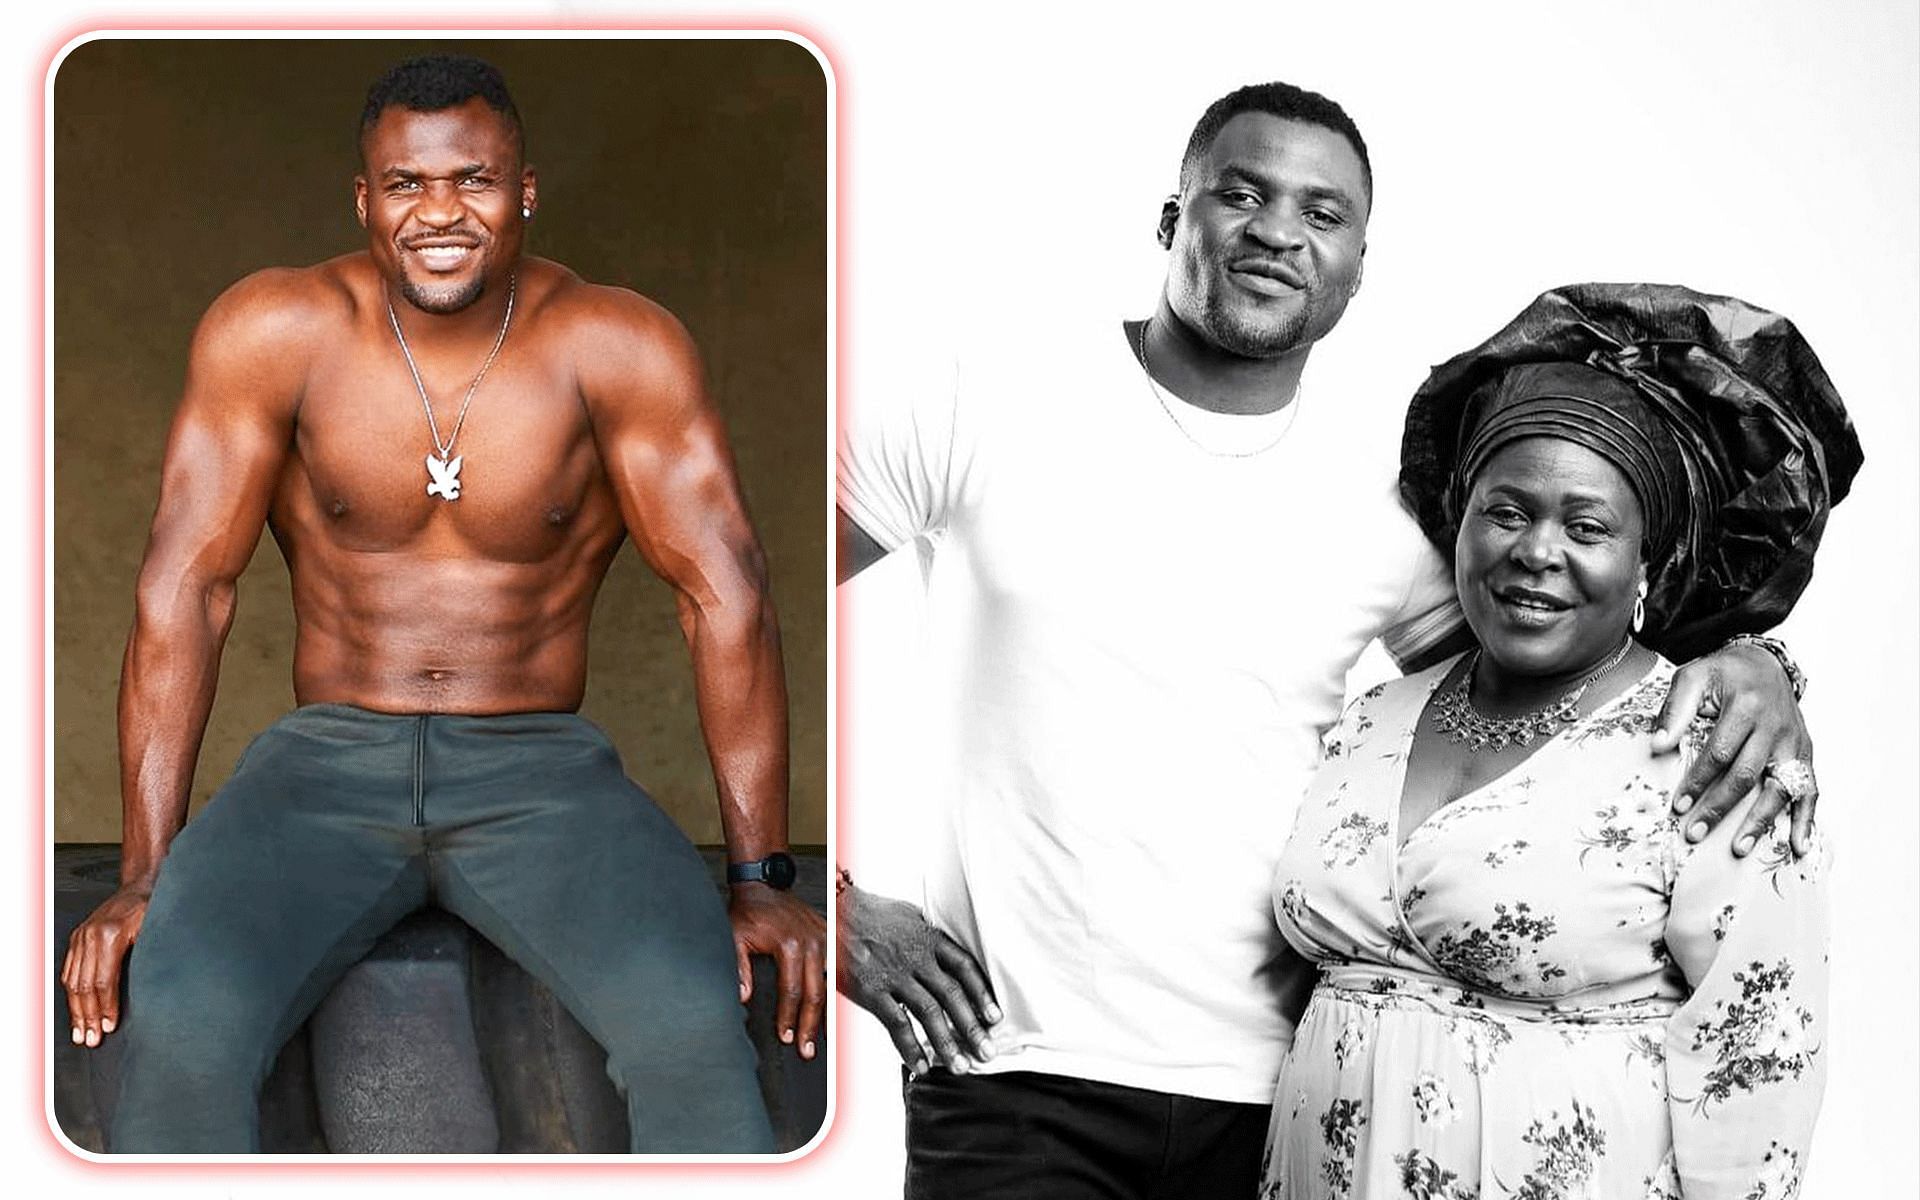 Francis Ngannou recalls buying old truck to support his family. [Image credits: @francisngannou on Instagram]